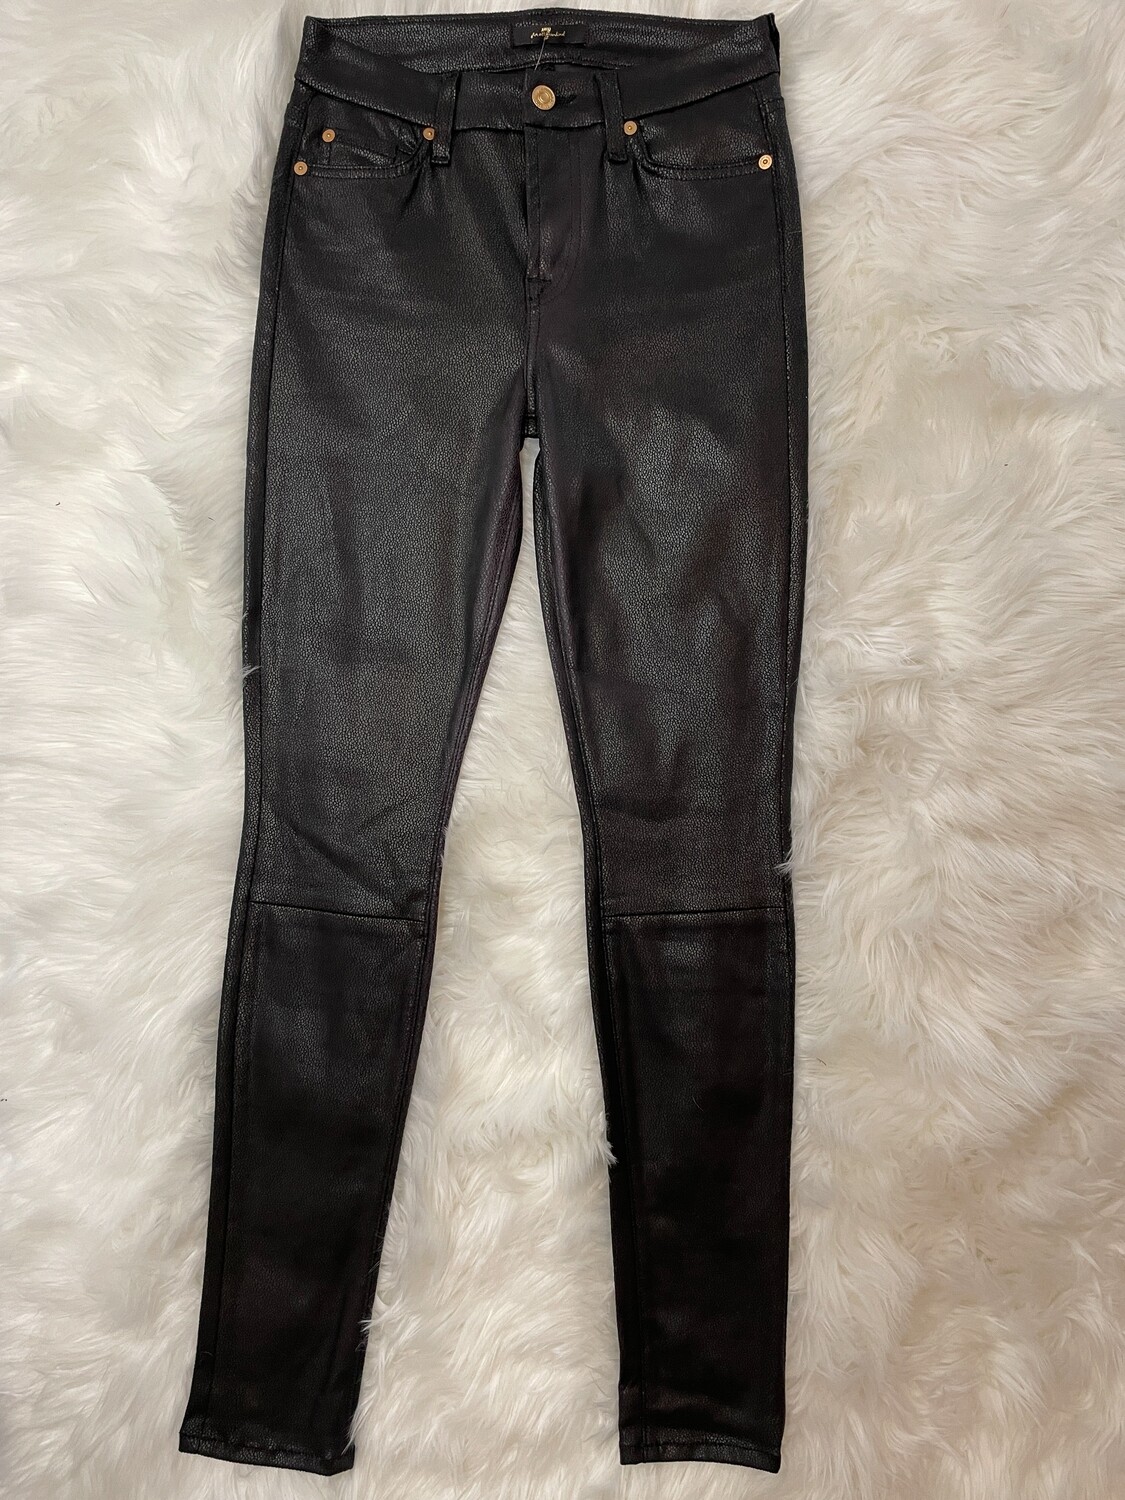 7 For All Mankind Black Faux Leather Pants - Size 26